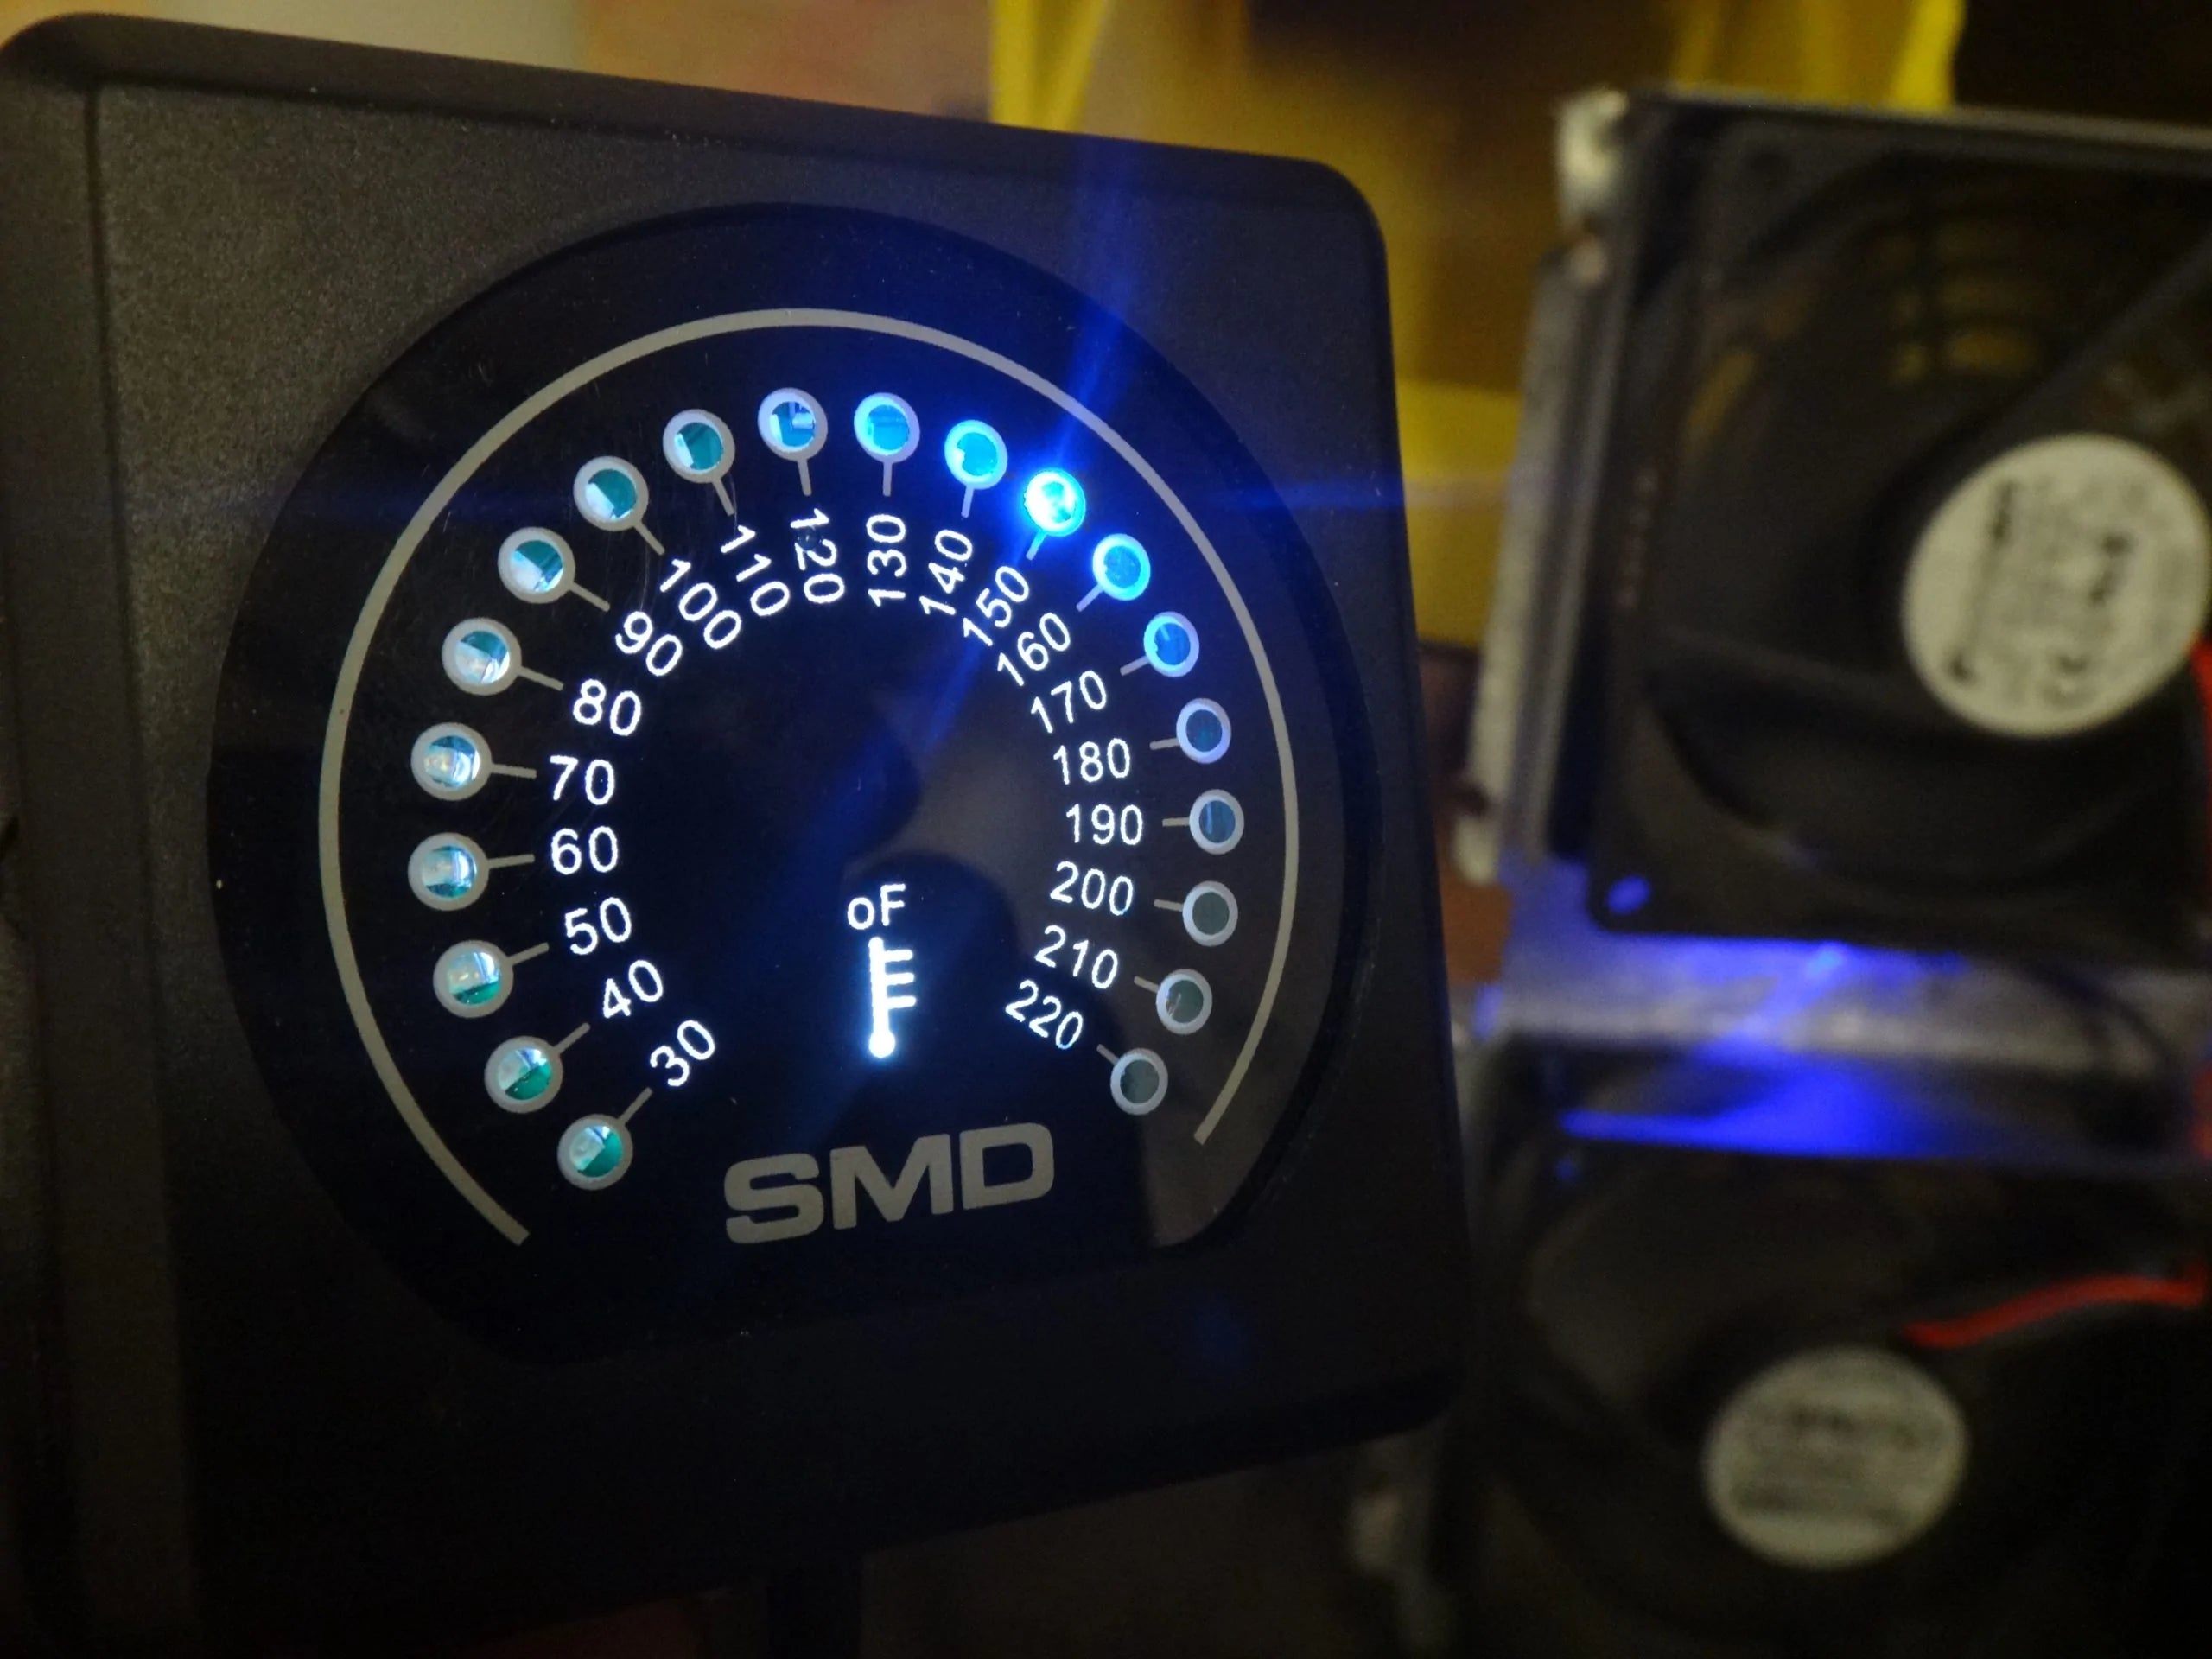 SMD TM-1 Temperature Monitor and Programmable Fan Controller